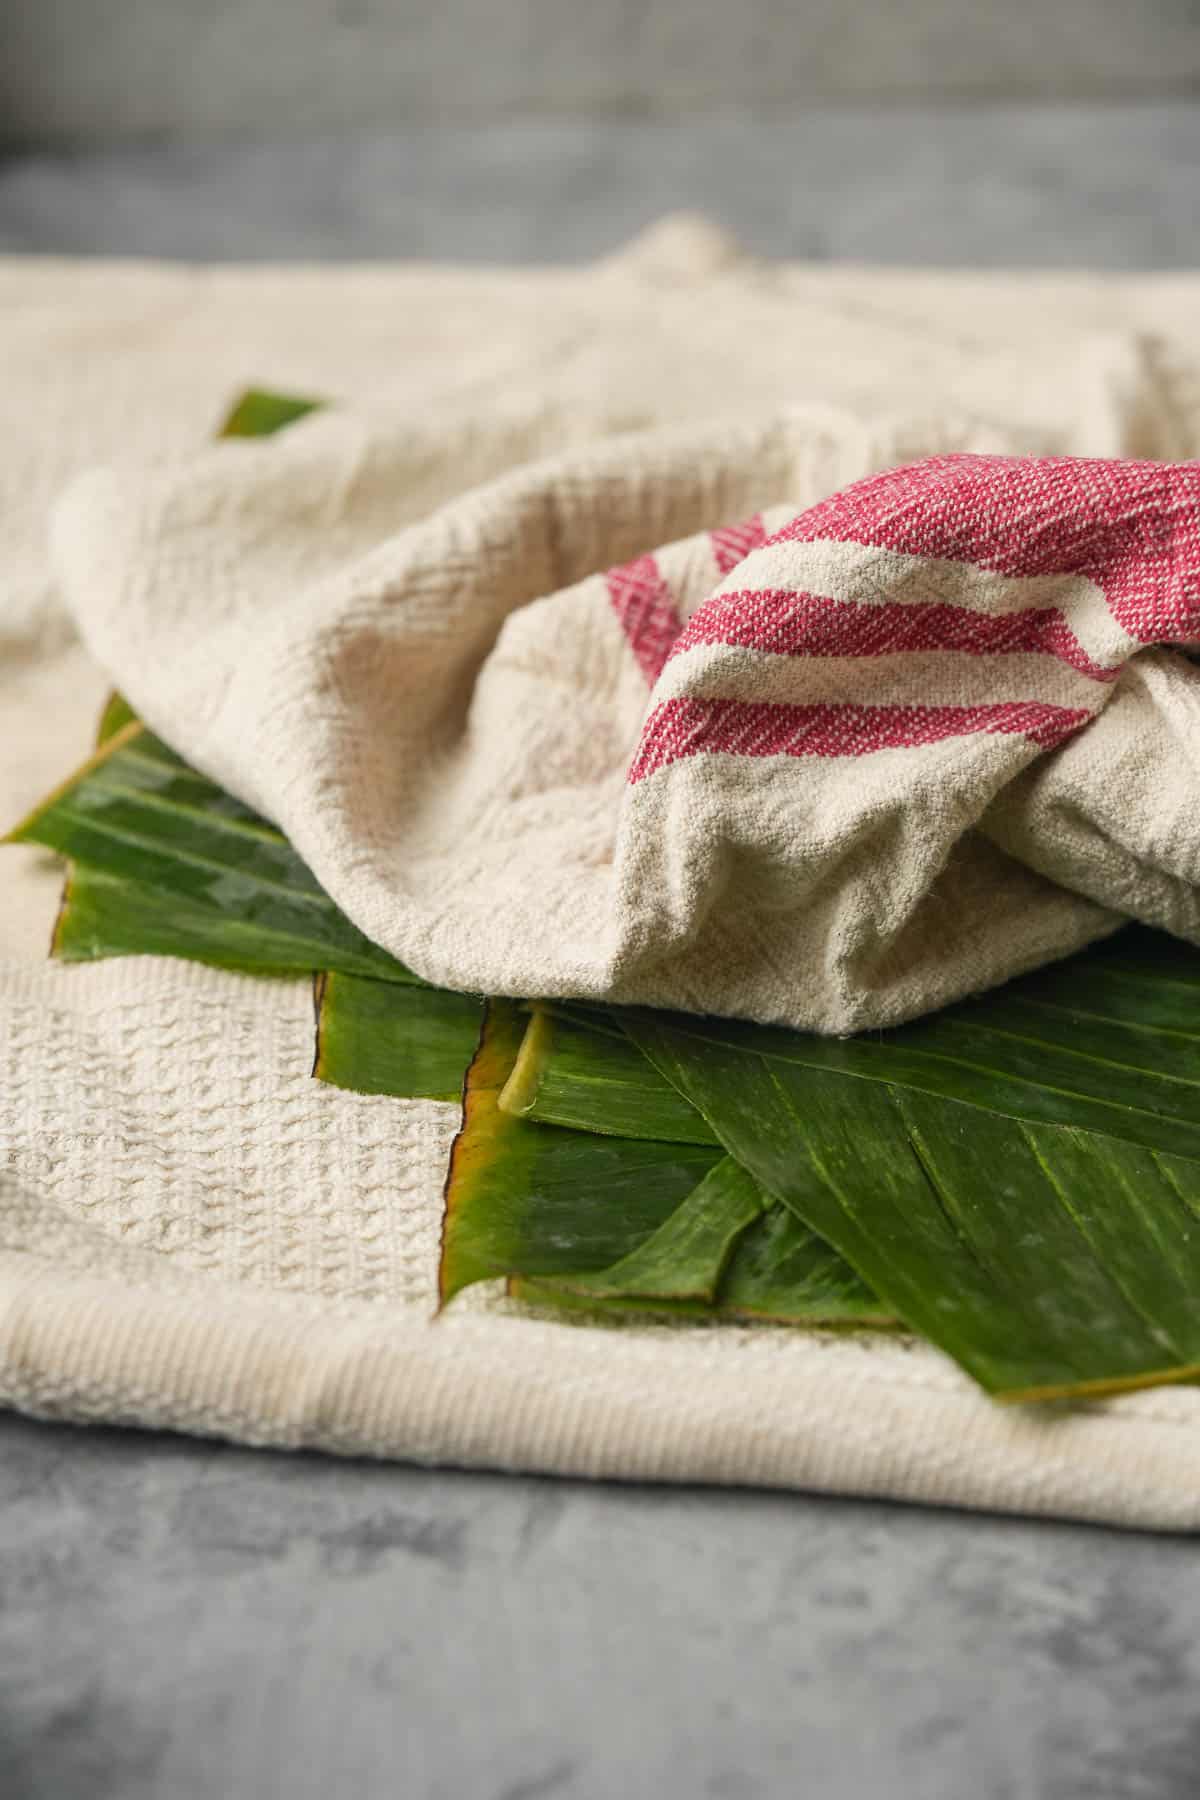 A towel with banana leaves drying on it.